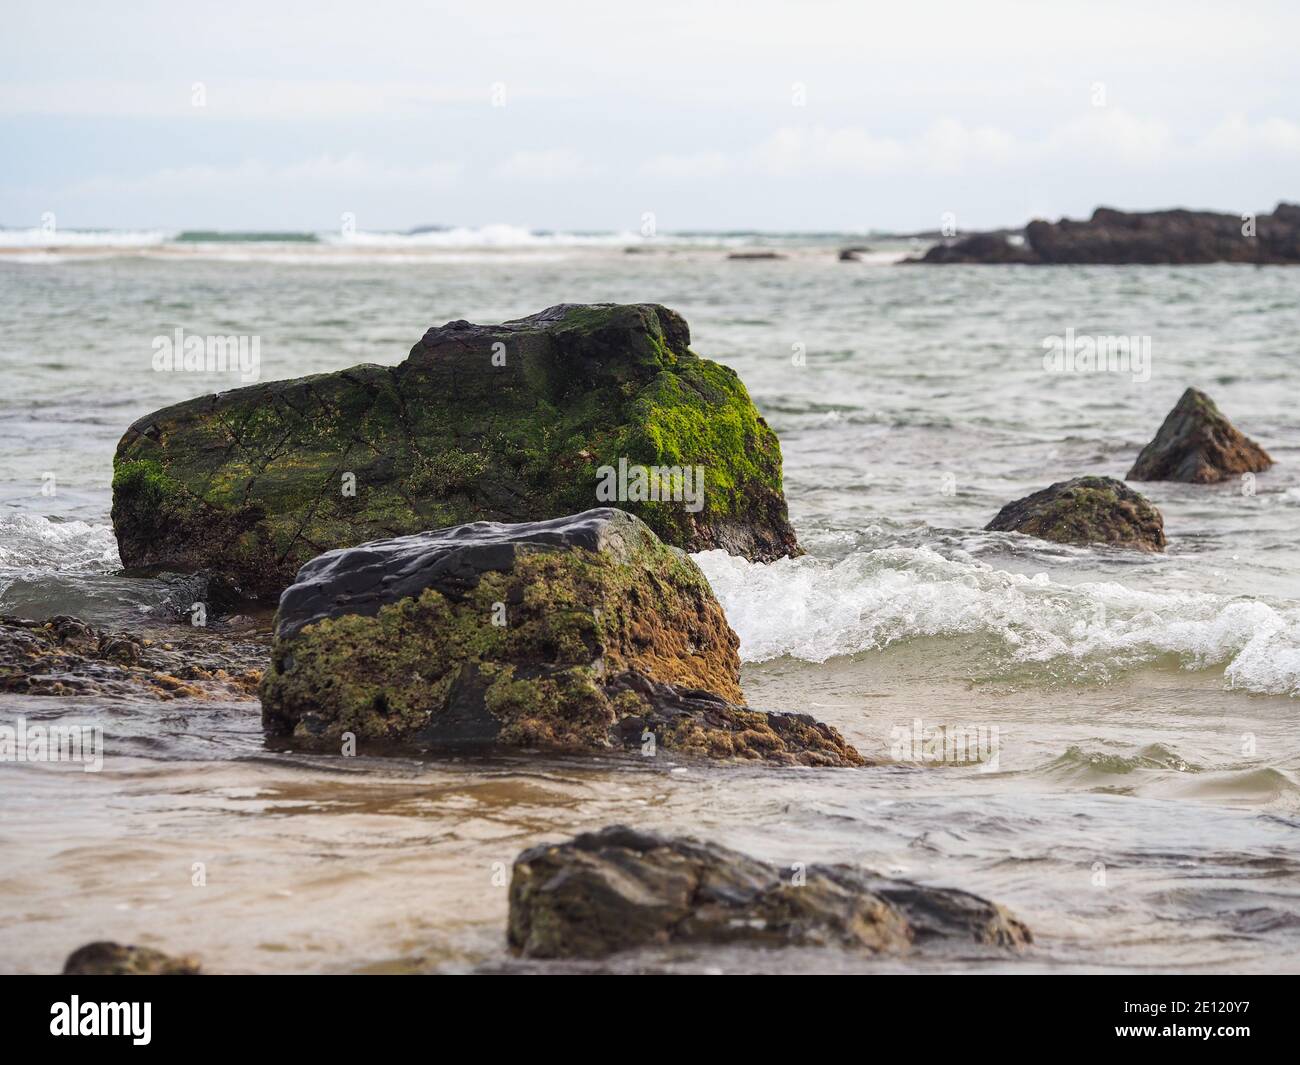 a carpet of green moss and Algae on these large beach rocks, sea waves washing over the sand, Mid North Coast, Australia Stock Photo